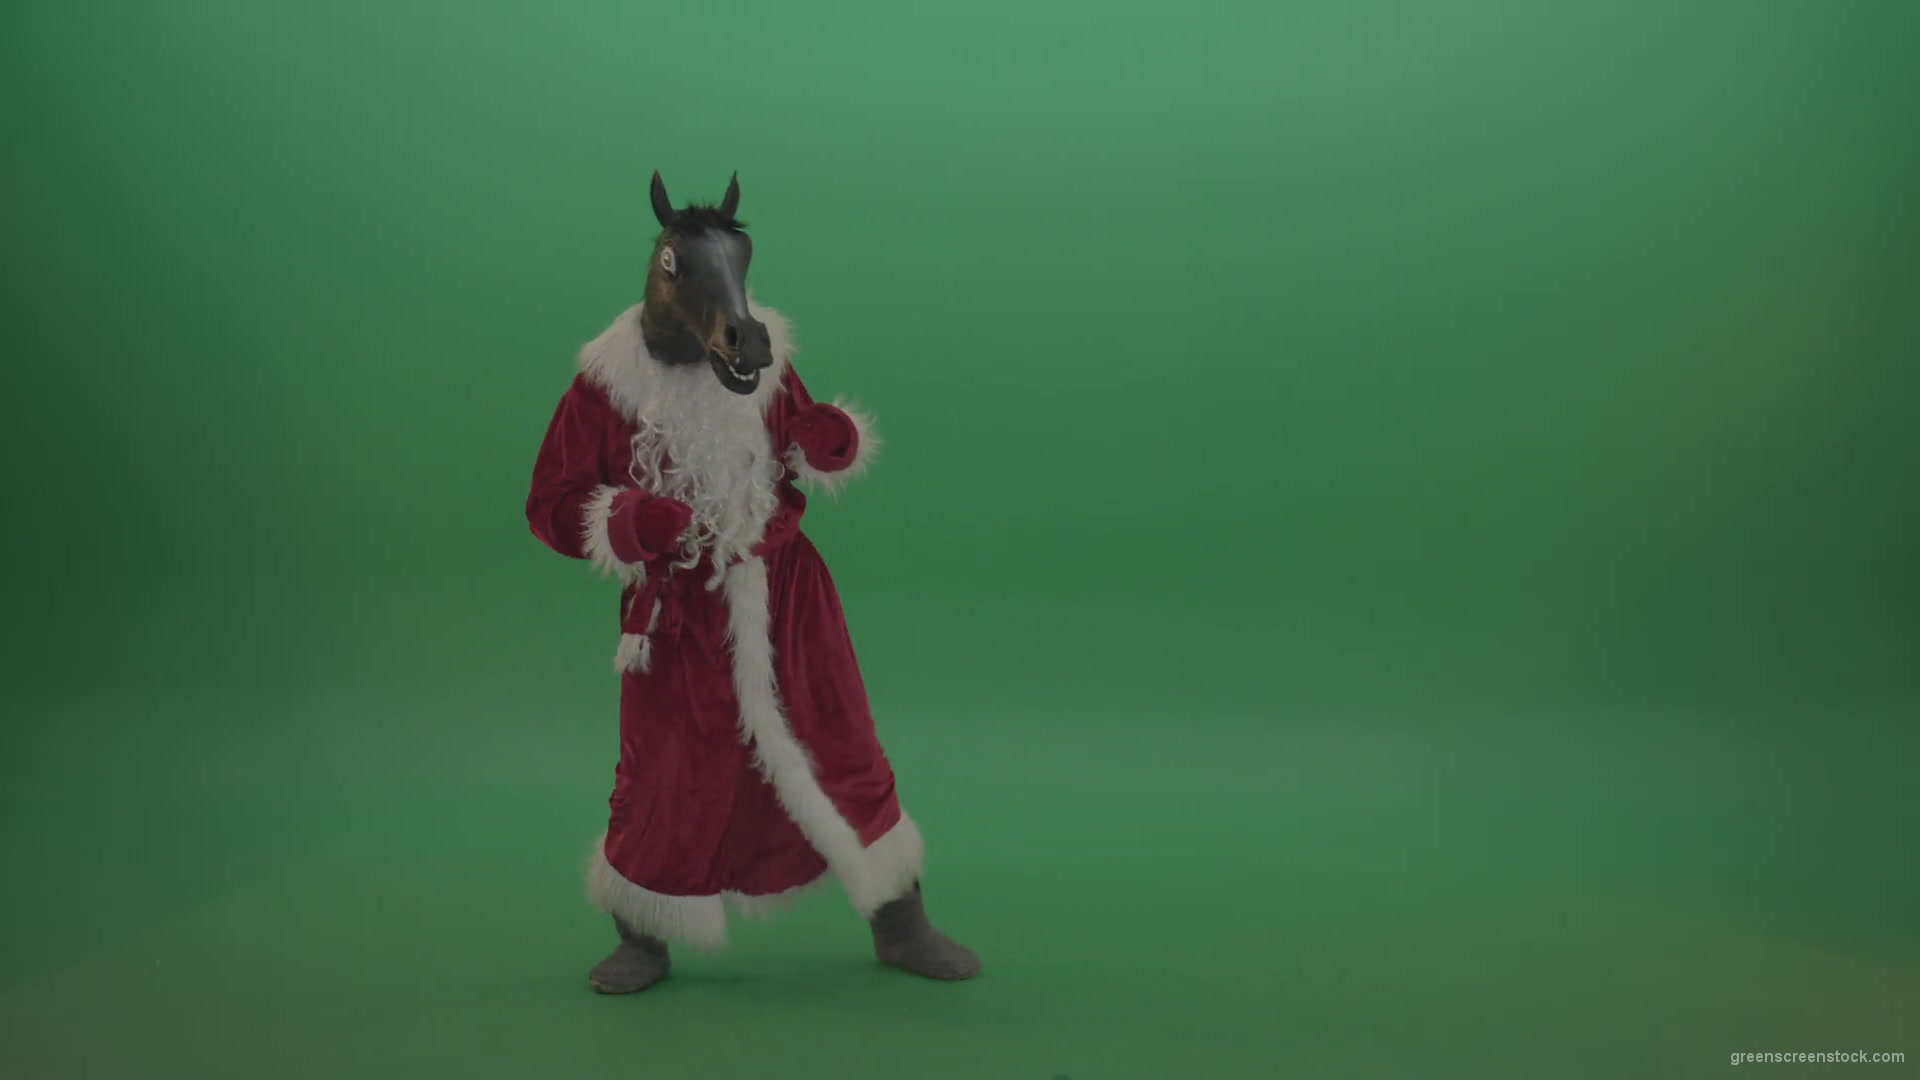 Horse-head-santa-displays-his-fight-techniques-over-chromakey-background-1920_004 Green Screen Stock